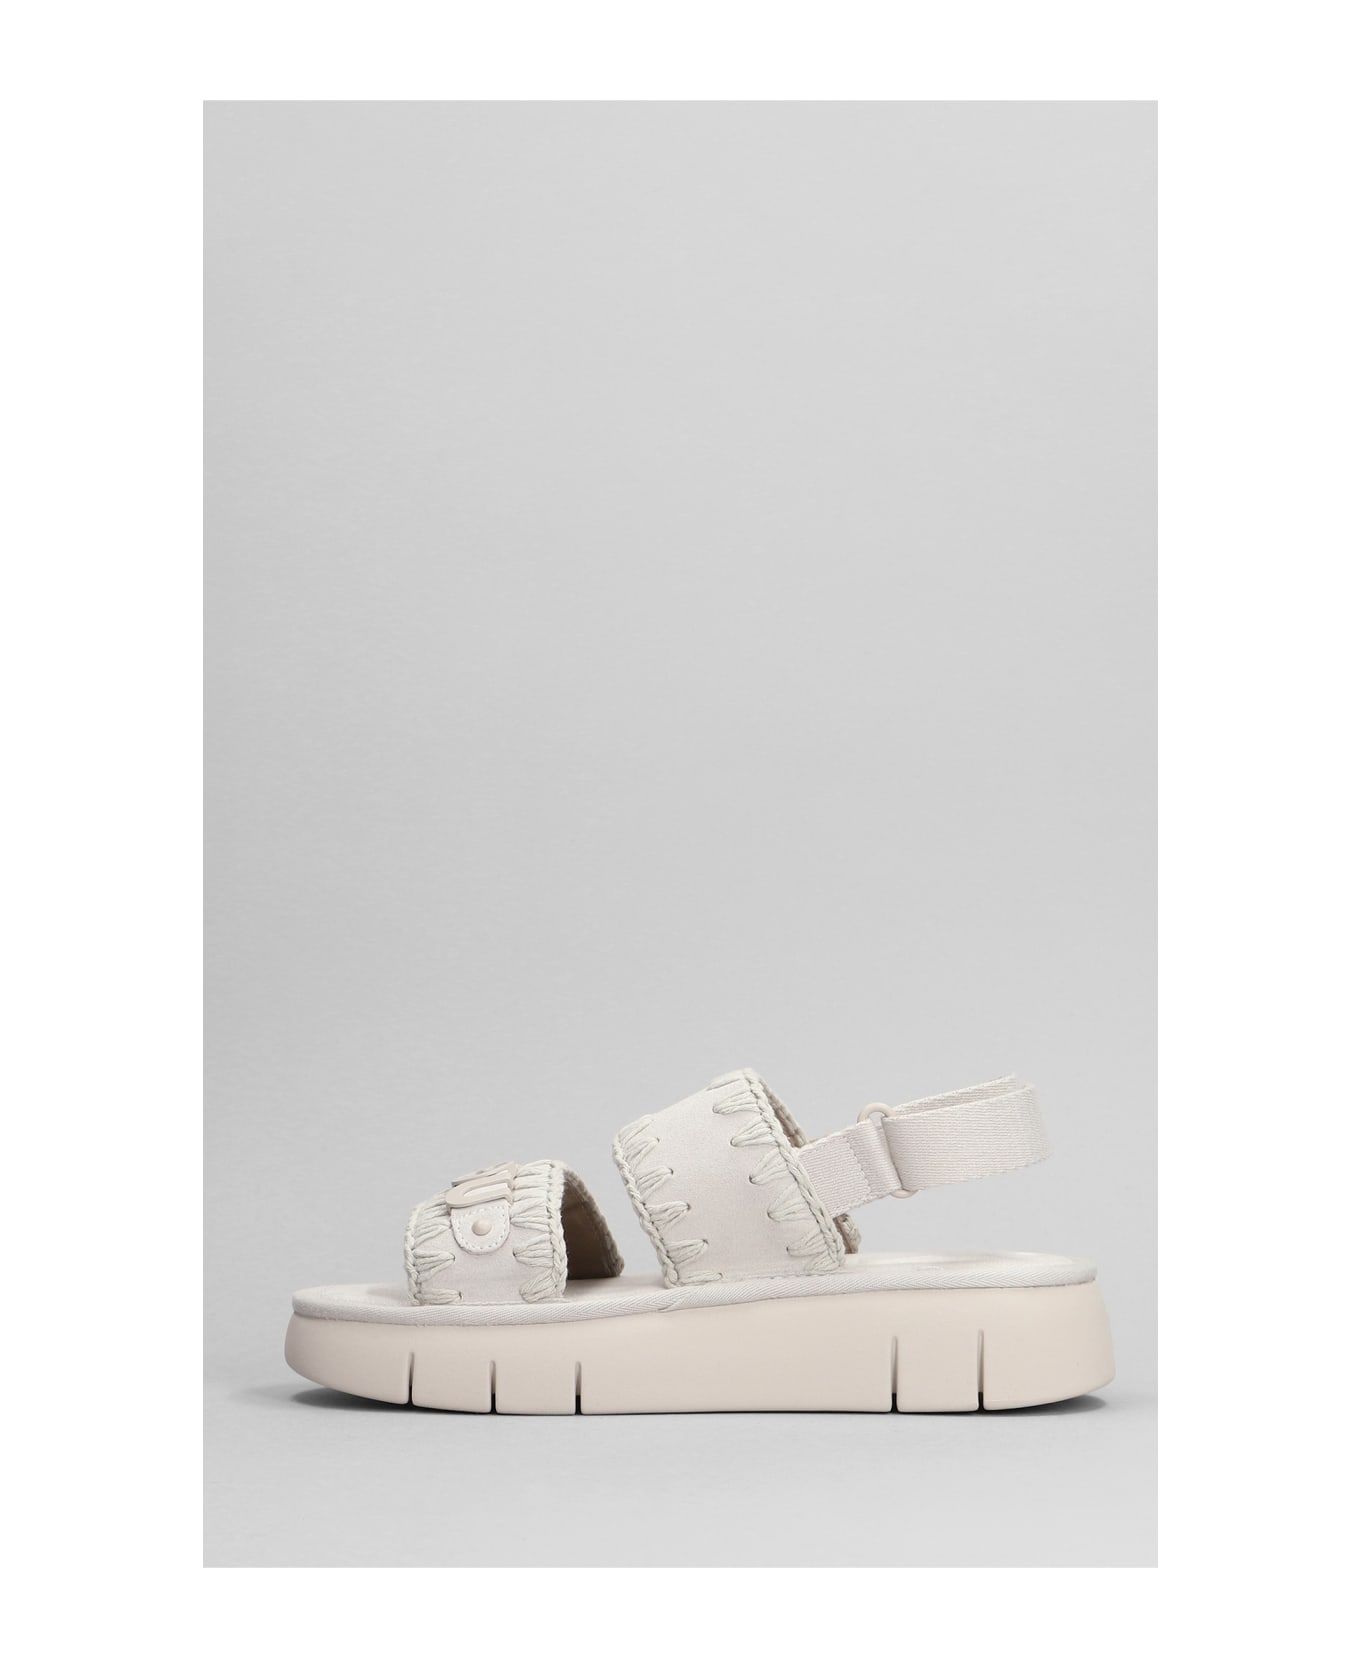 Mou Bounce Sandals In Grey Suede - Beige サンダル